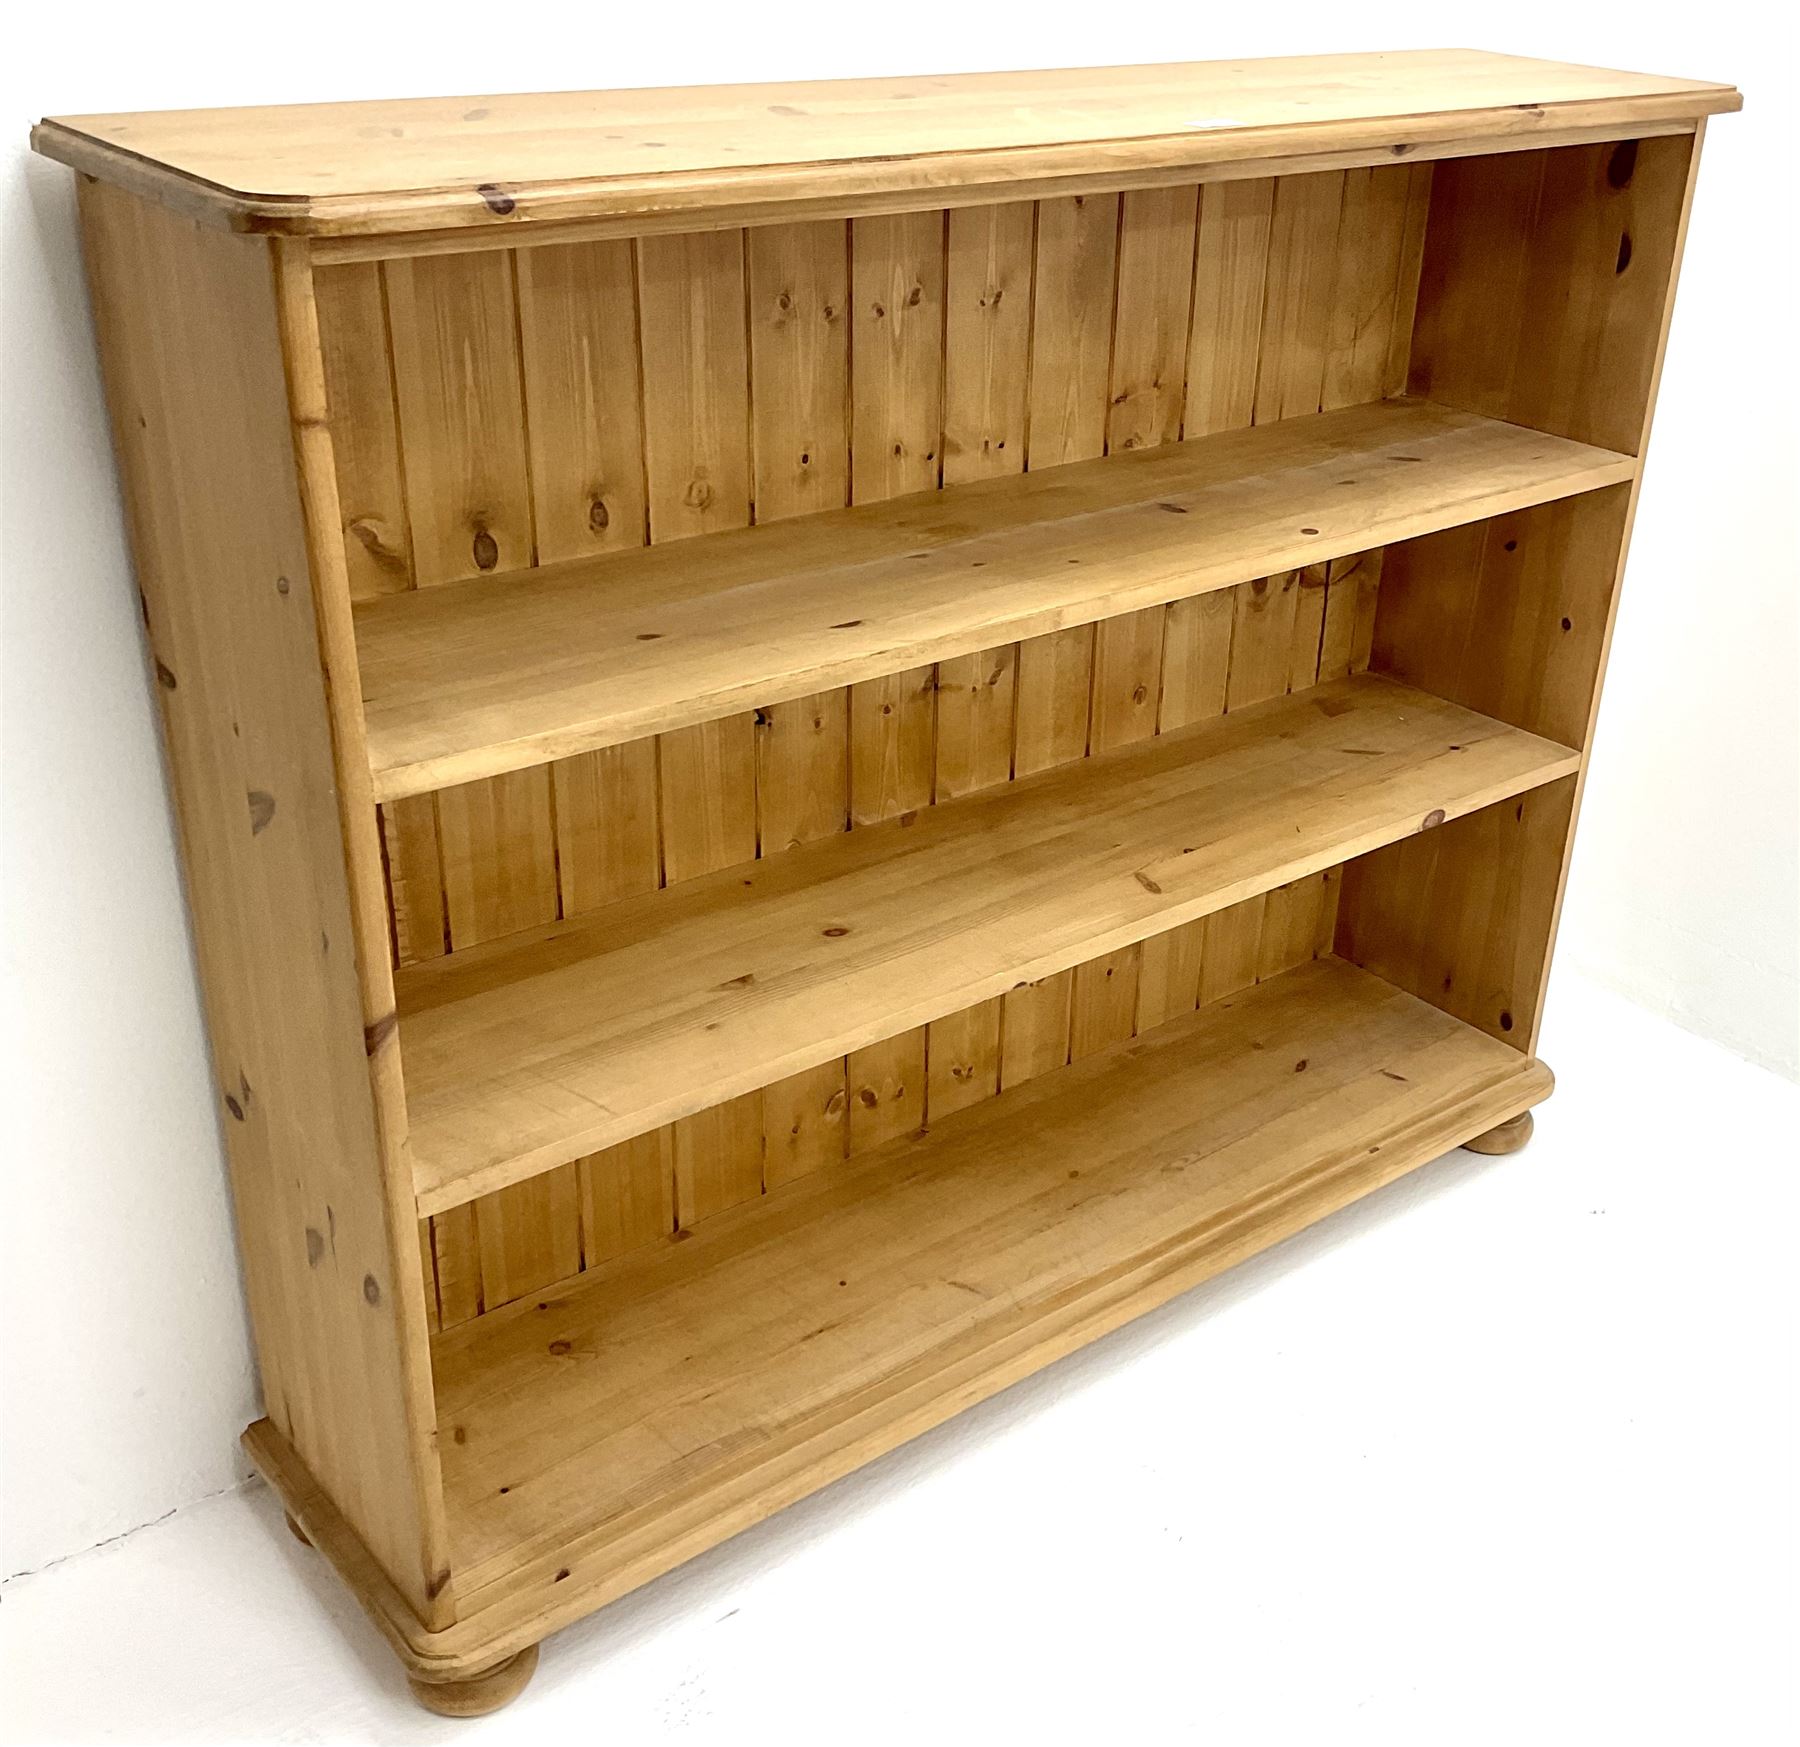 Solid pine open bookcase - Image 2 of 3